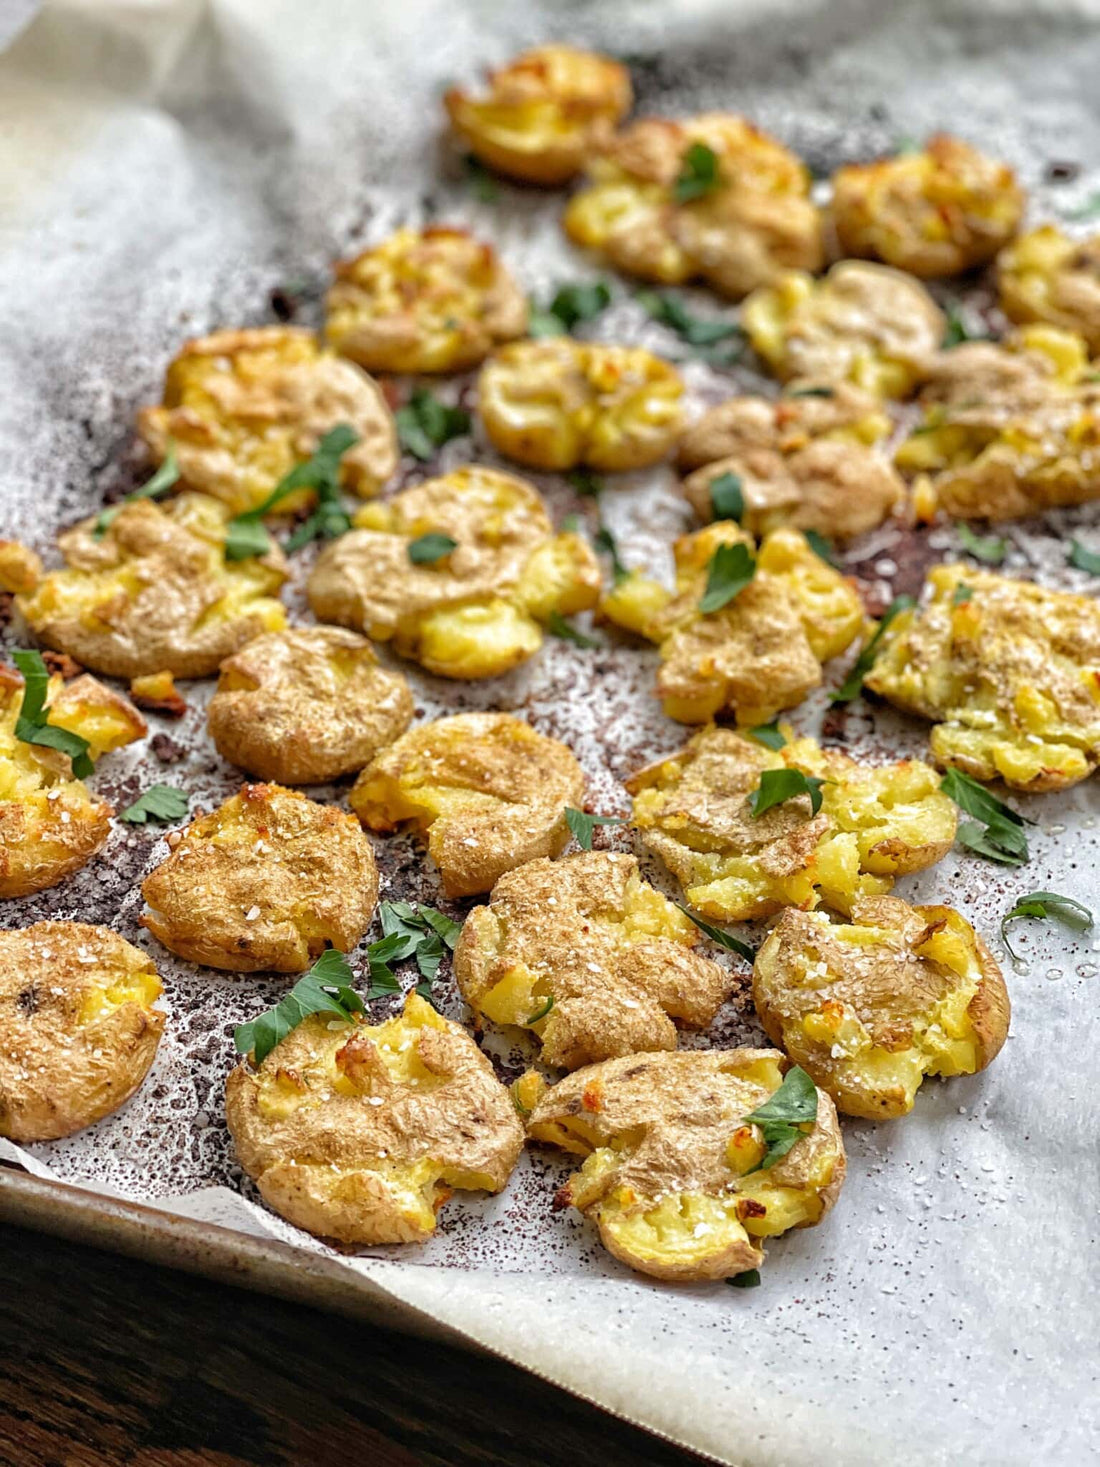 Easy Smashed Potatoes with Cracked Black Pepper Rub